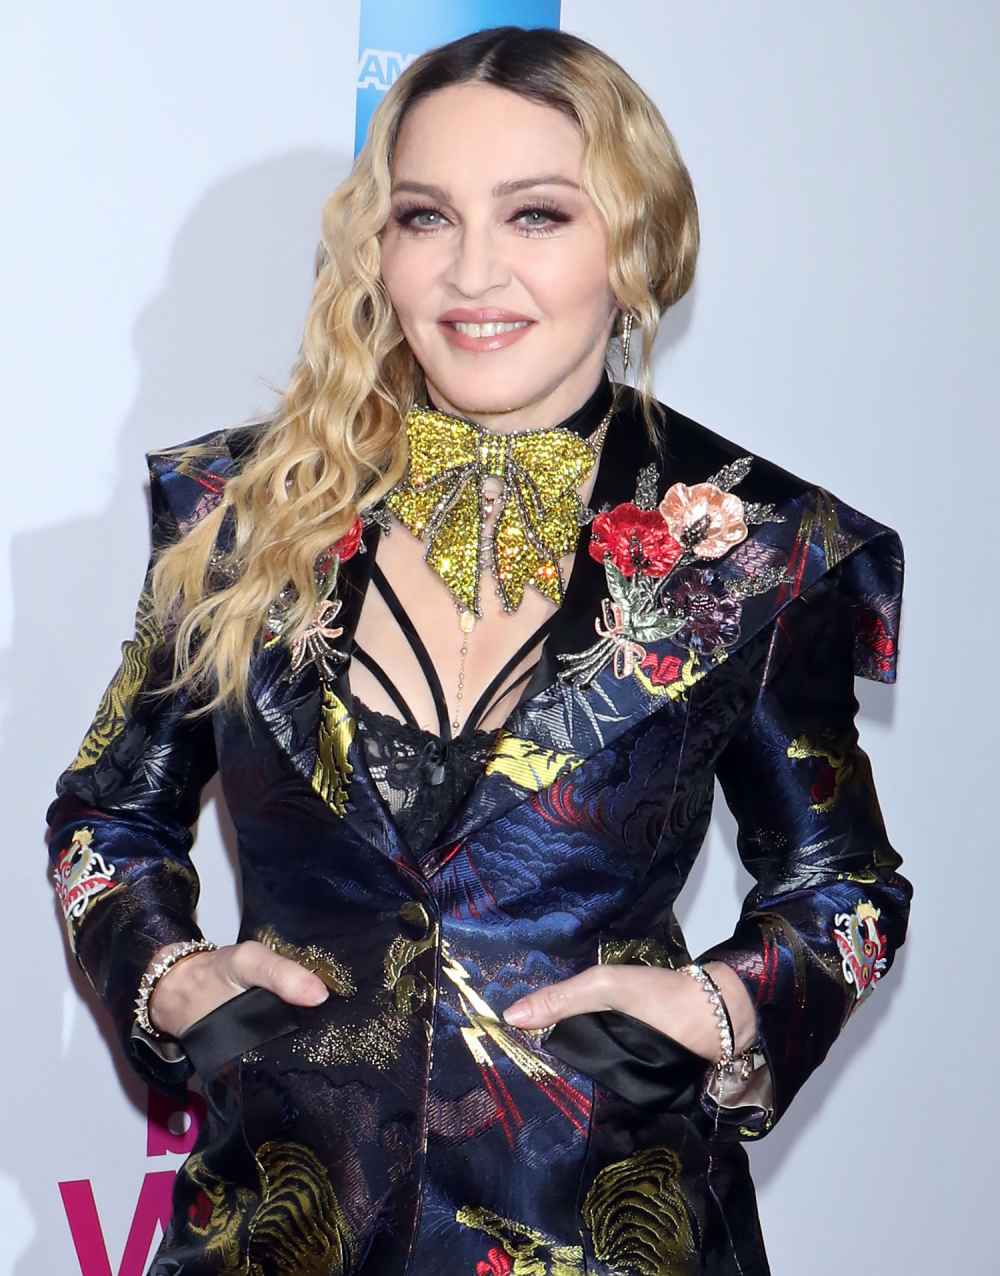 Madonna Gets Red ‘X’ Tattooed on Her Wrist: ‘I’m Used to Pain’